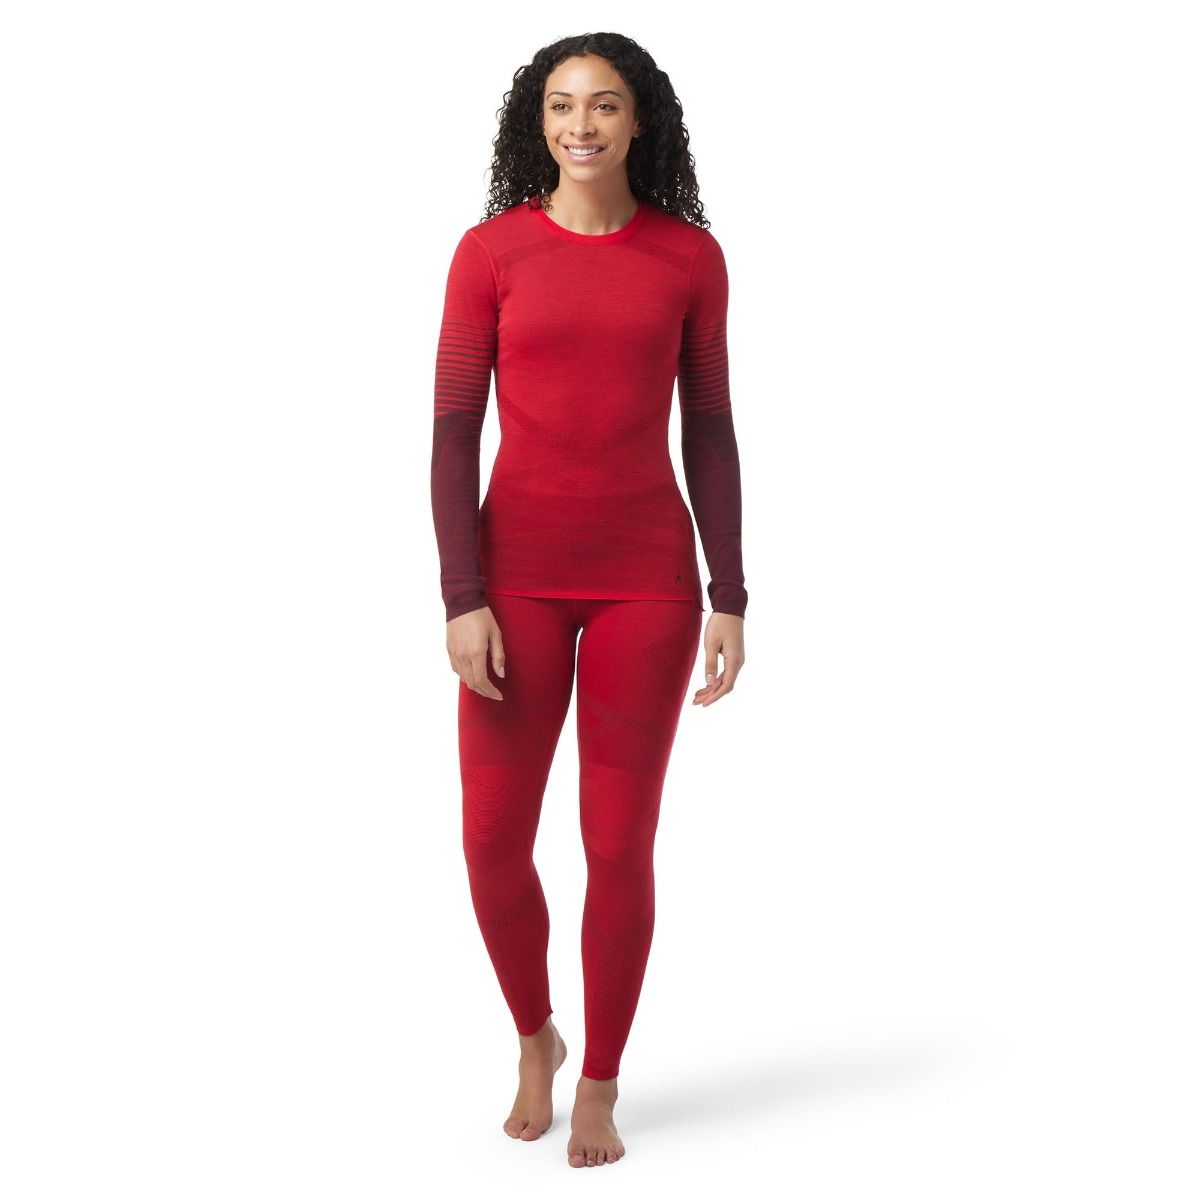 Covalent Activewear Womens Full-Zip Soft Space Dye Dominican Republic